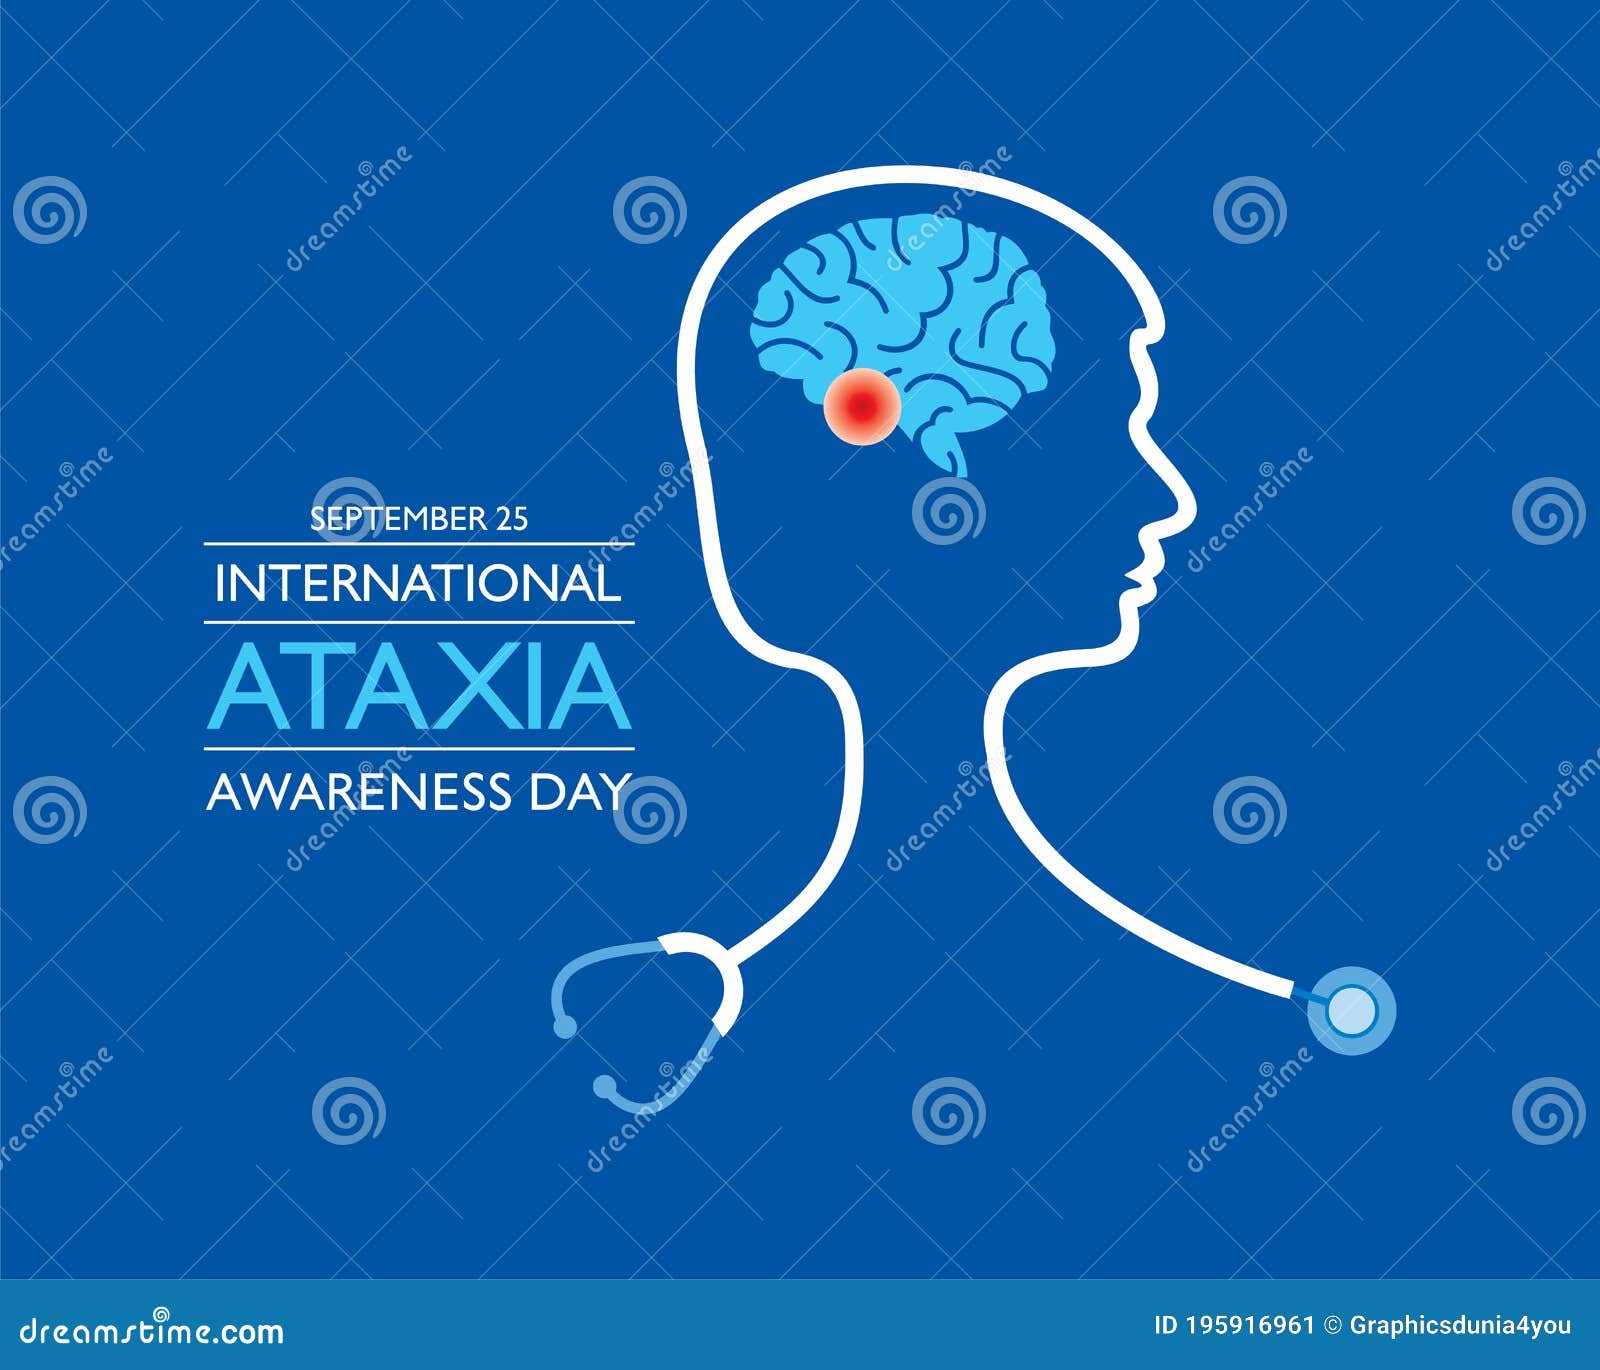 international ataxia awareness day observed on september 25